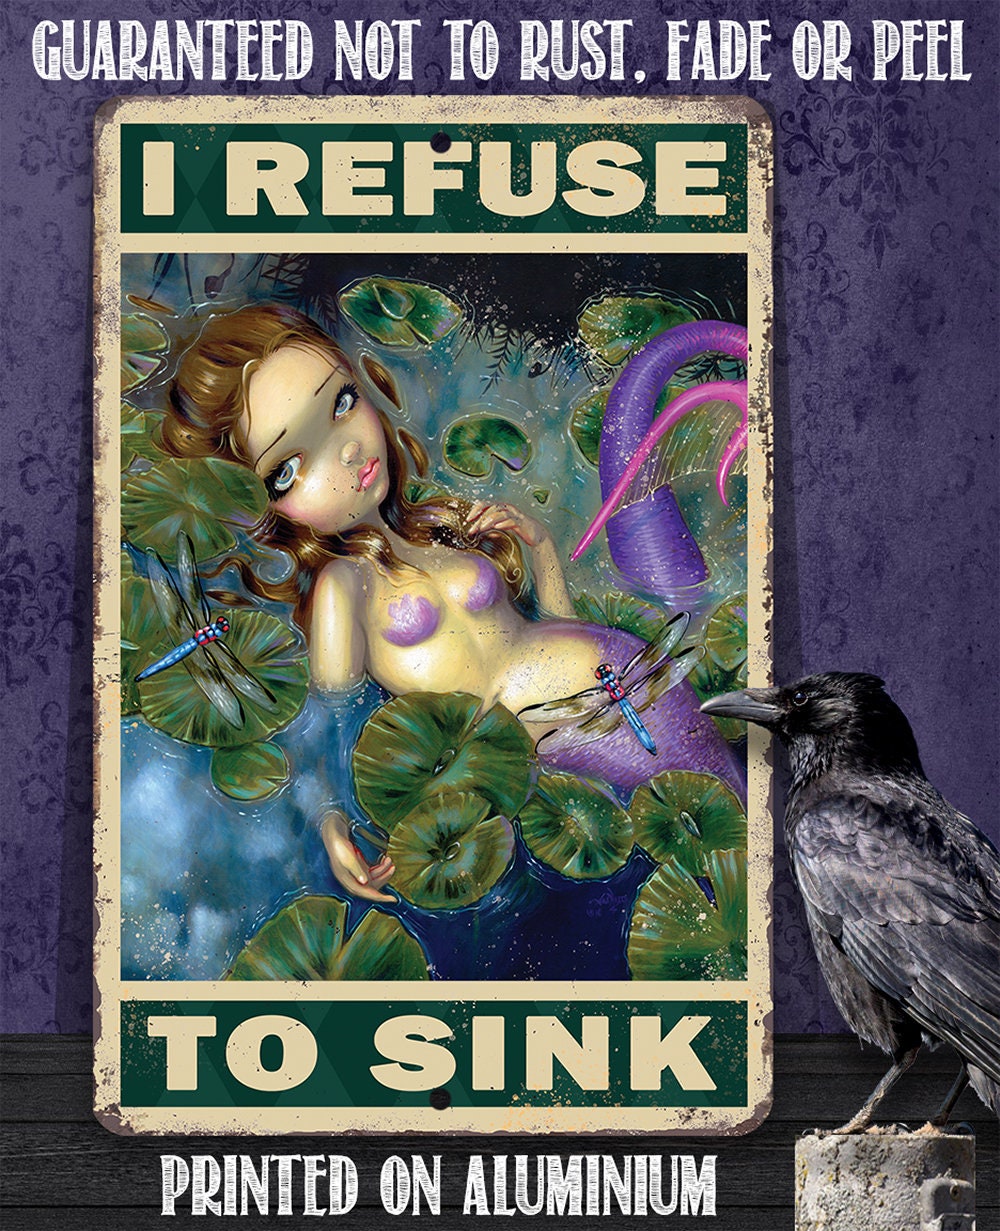 I Refuse To Sink - 8" x 12" or 12" x 18" Aluminum Tin Awesome Gothic Metal Poster Lone Star Art 